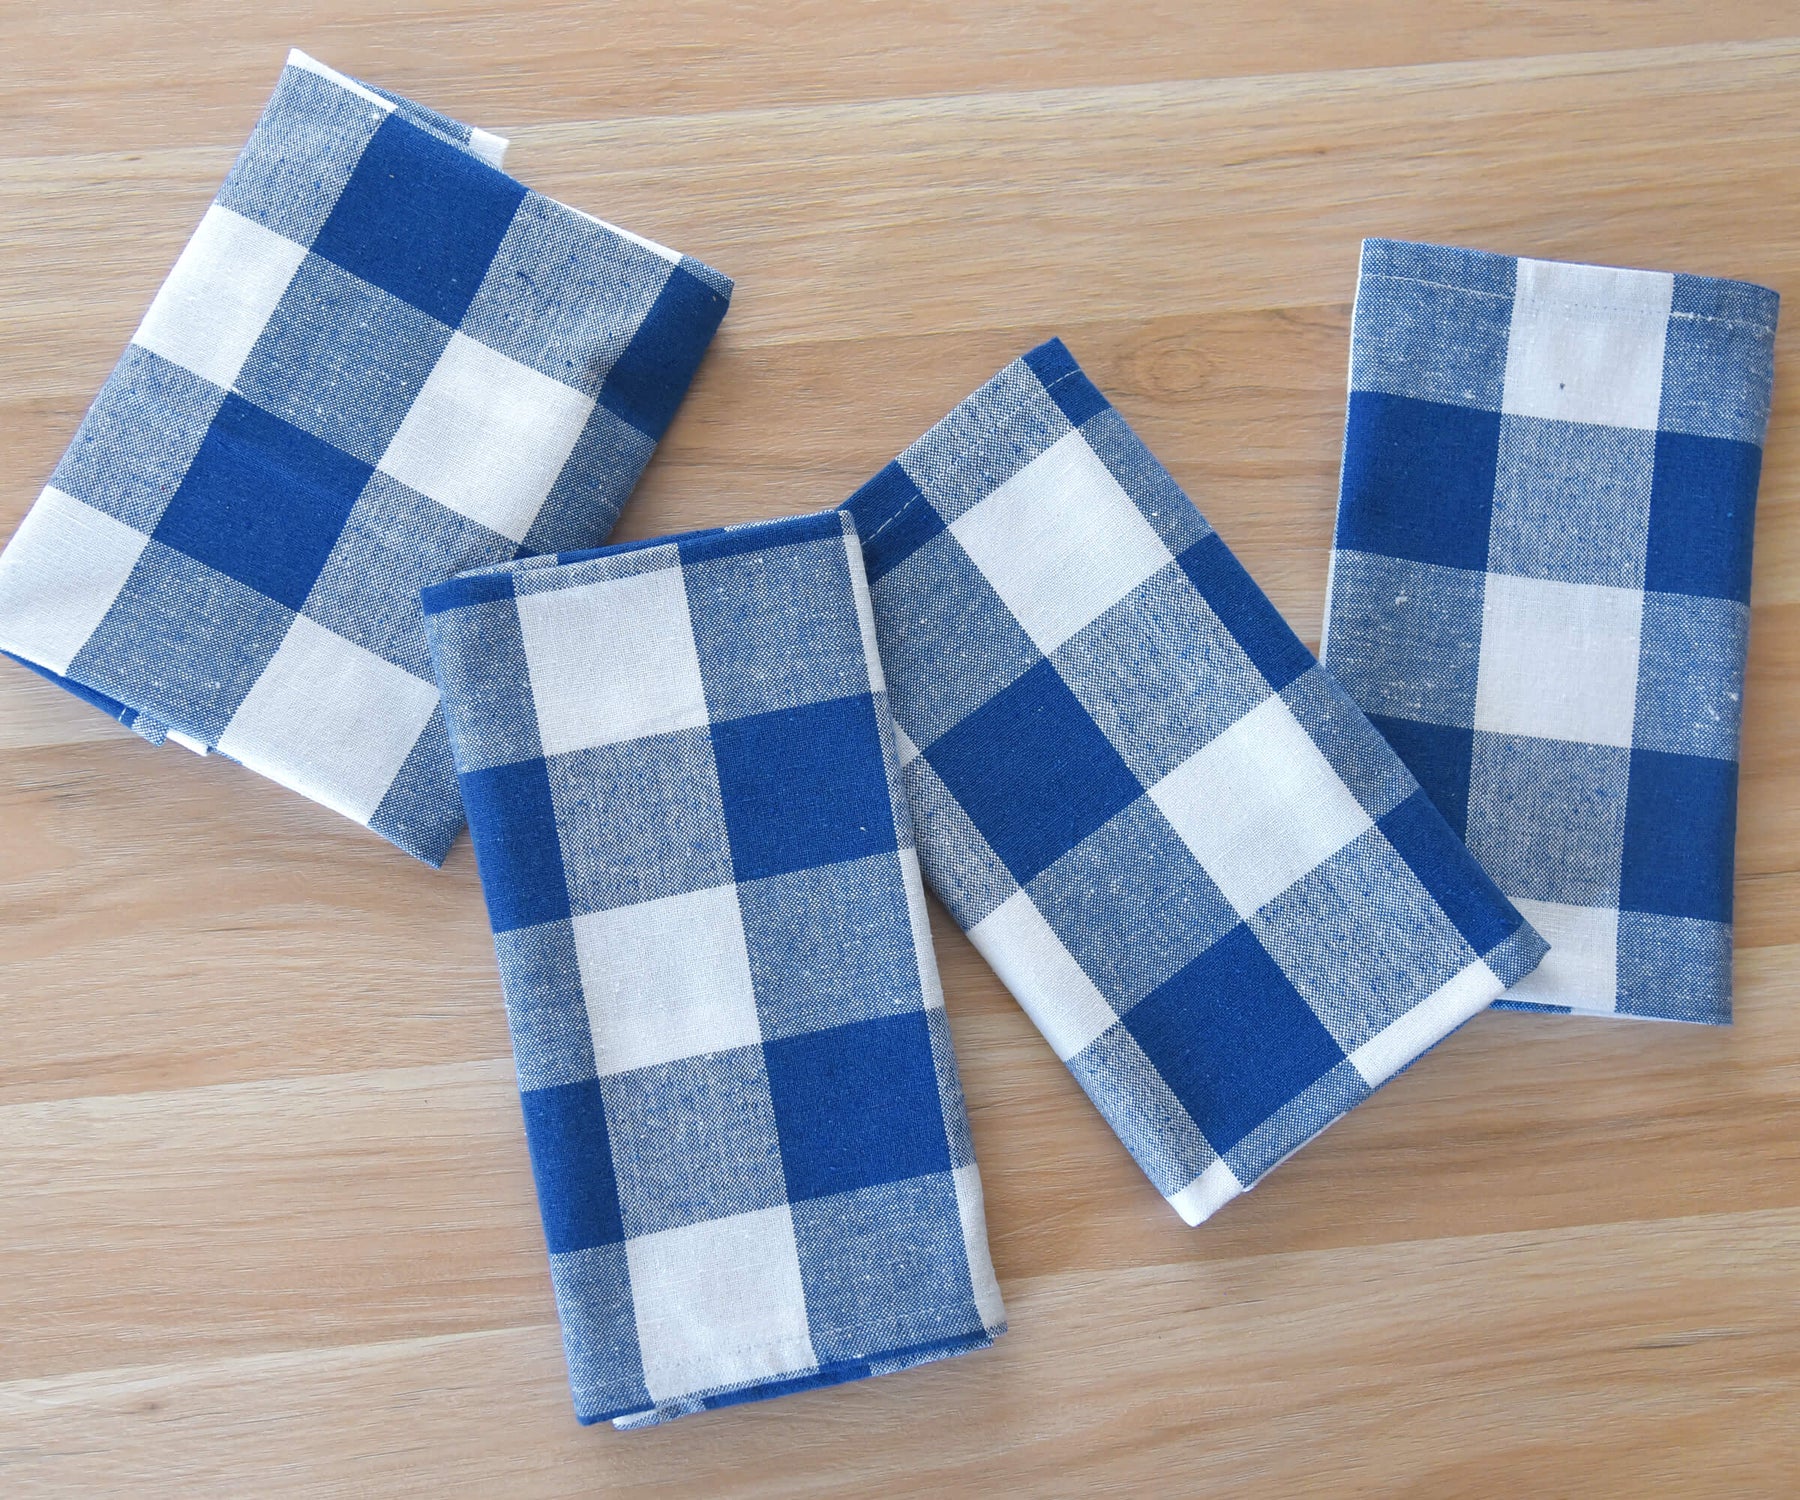 Infuse a serene vibe with blue napkins, enhancing your table decor with a calming color palette.